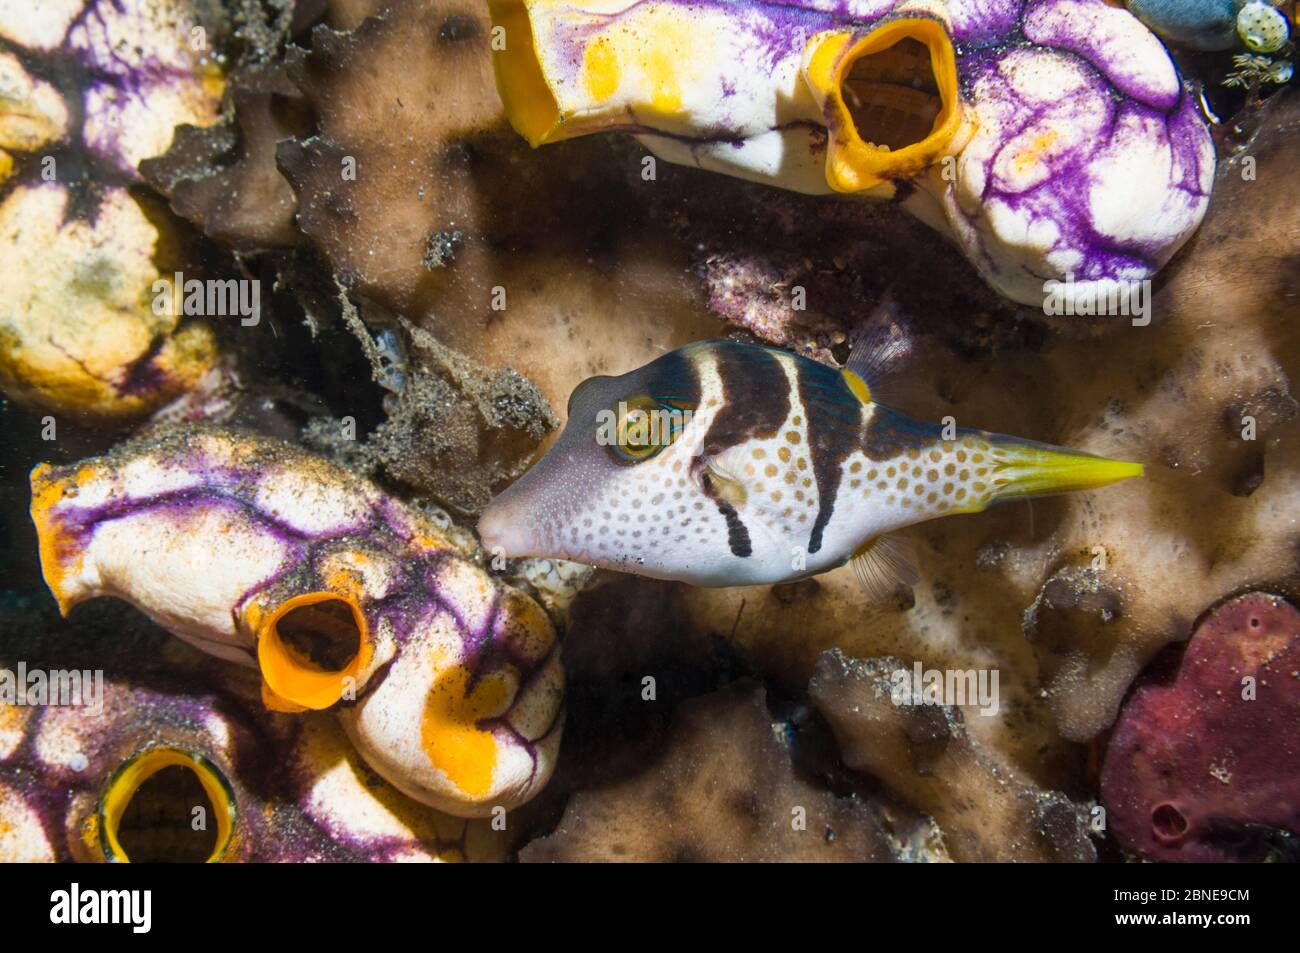 Valentine's puffer (Canthigaster valentini) with Golden sea squirts (Polycarpa aurata)  Lembeh, Sulawesi, Indonesia. Stock Photo